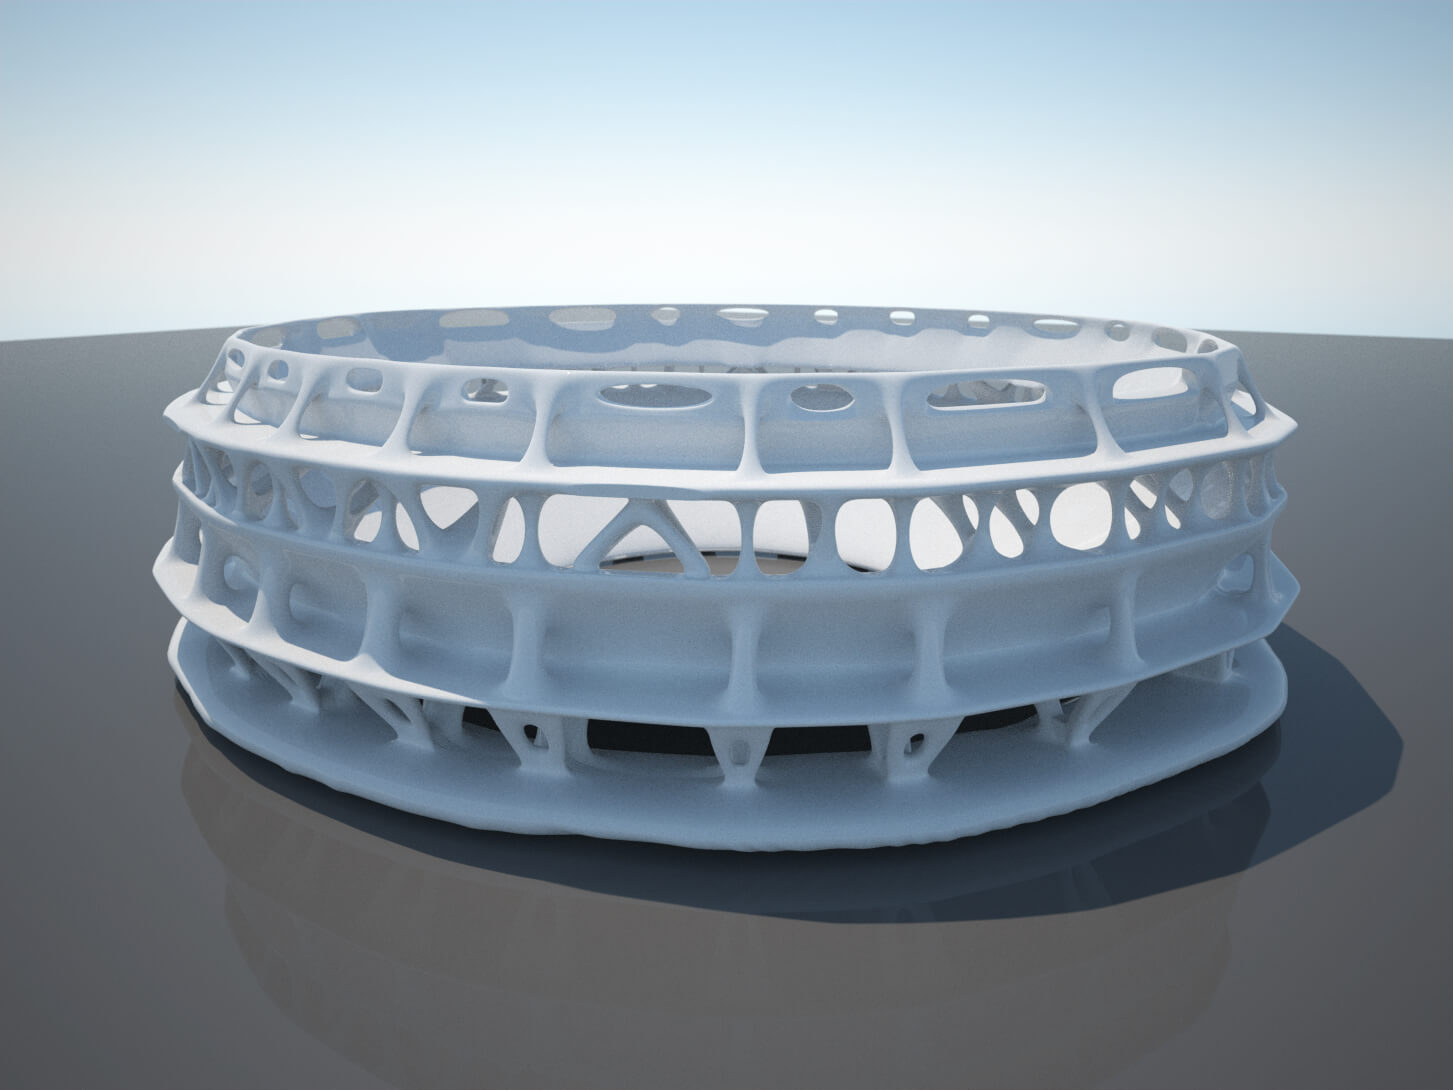 The re-design of the stadium using topology optimization techniques.